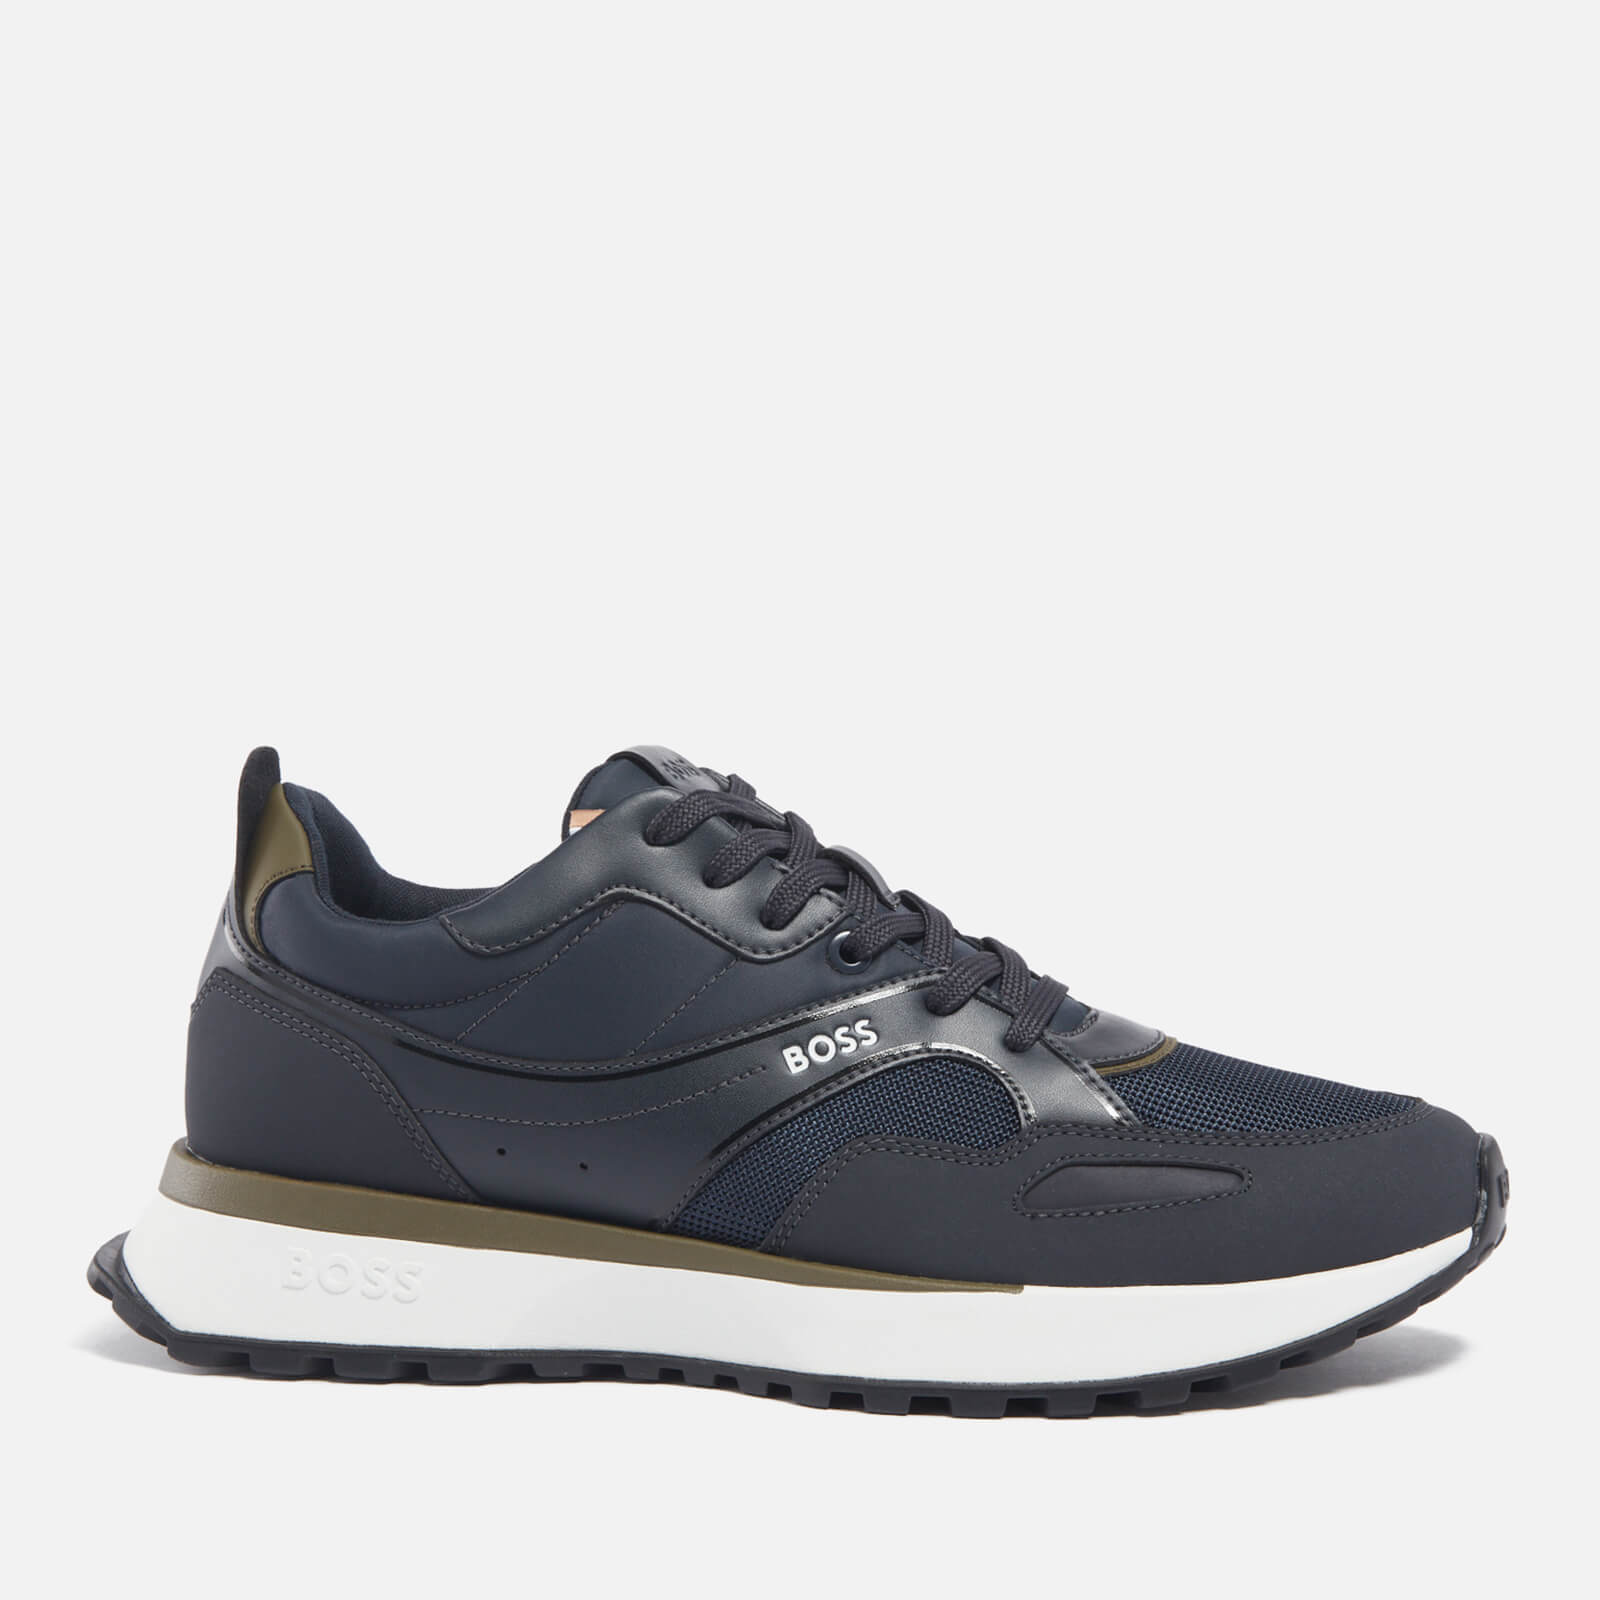 BOSS Men’s Jonah Runn N Mesh and Faux Leather Trainers